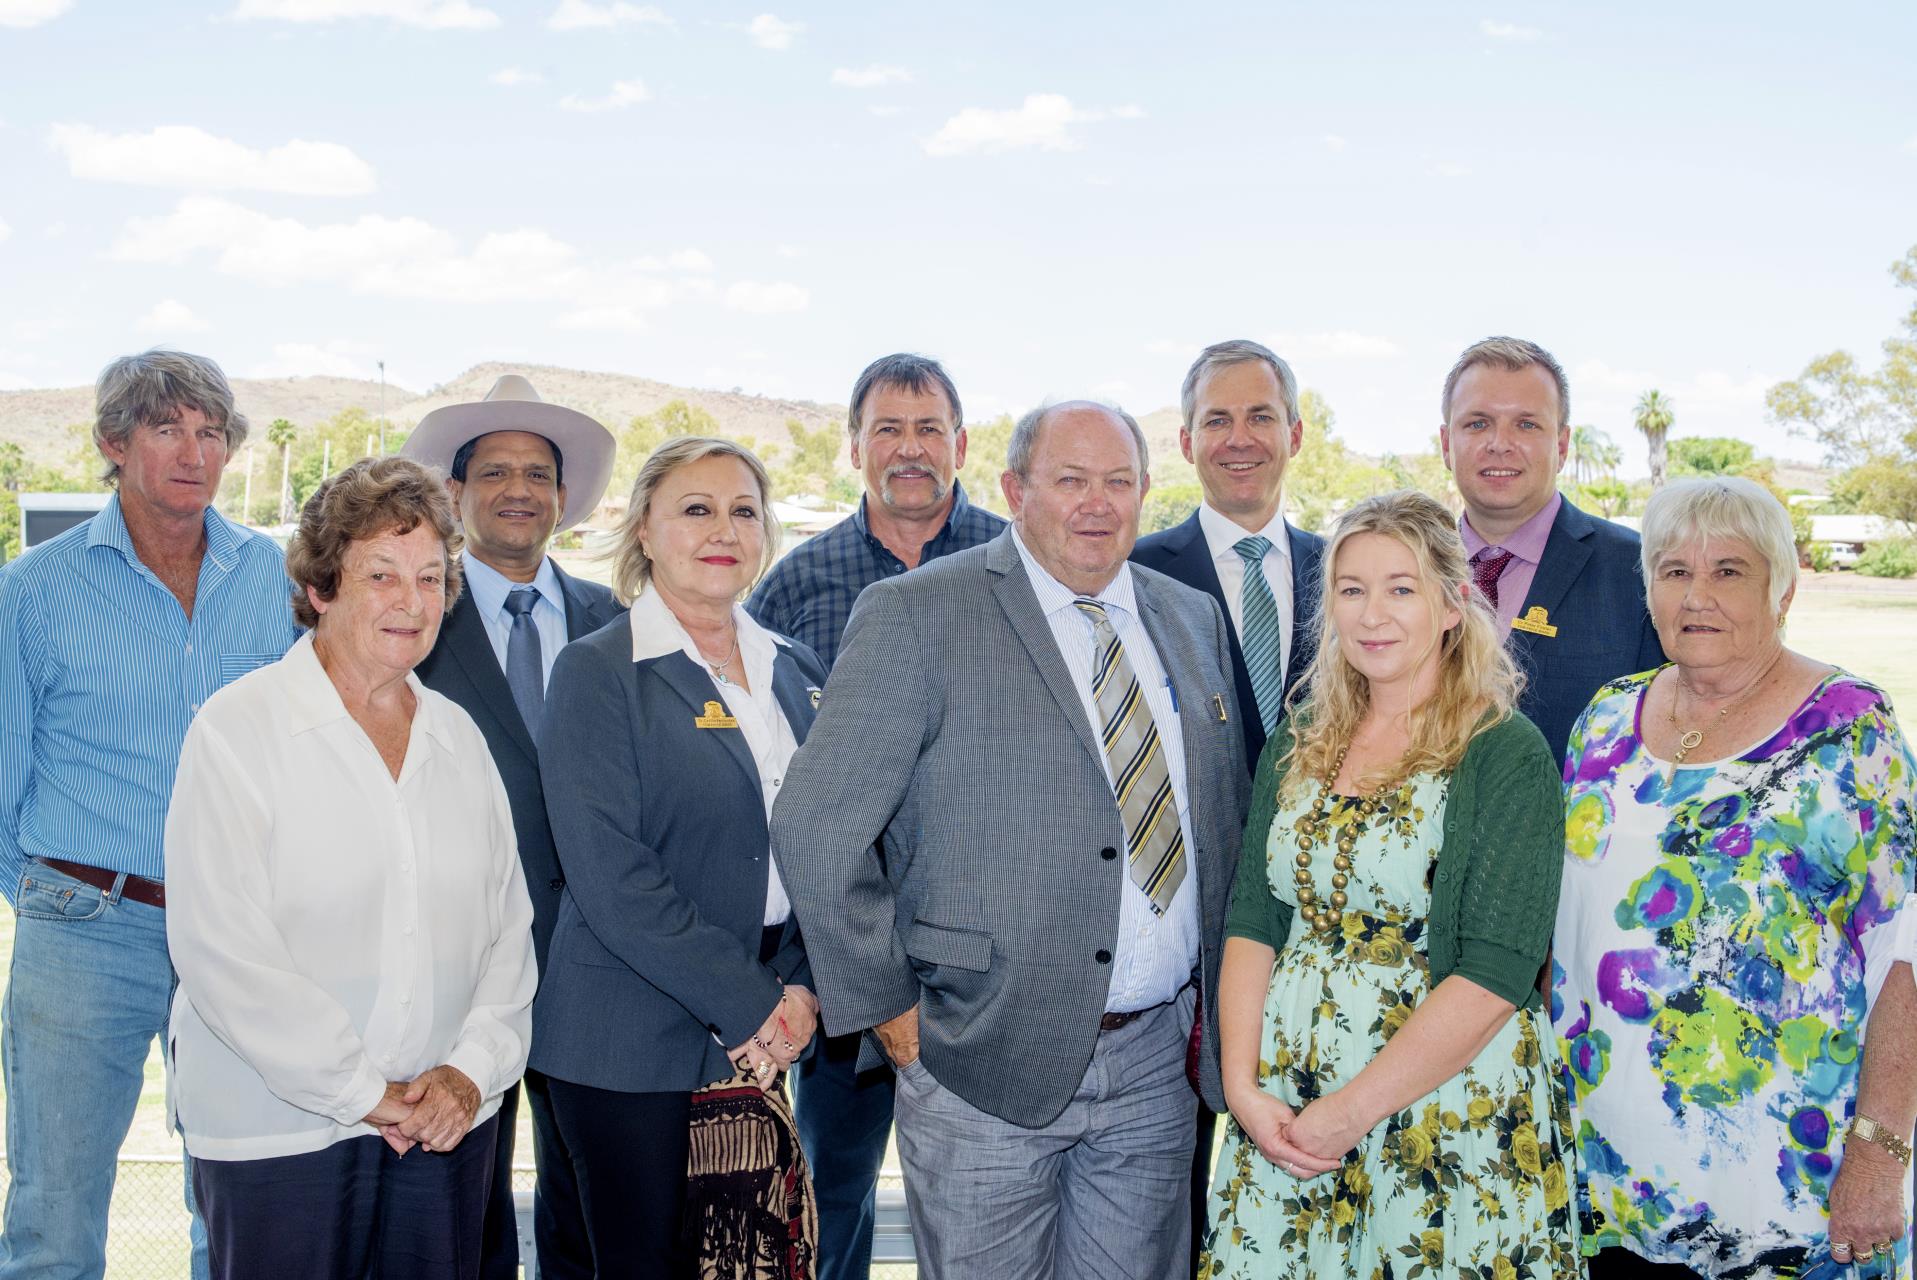 re-elects Cr White as Shire President